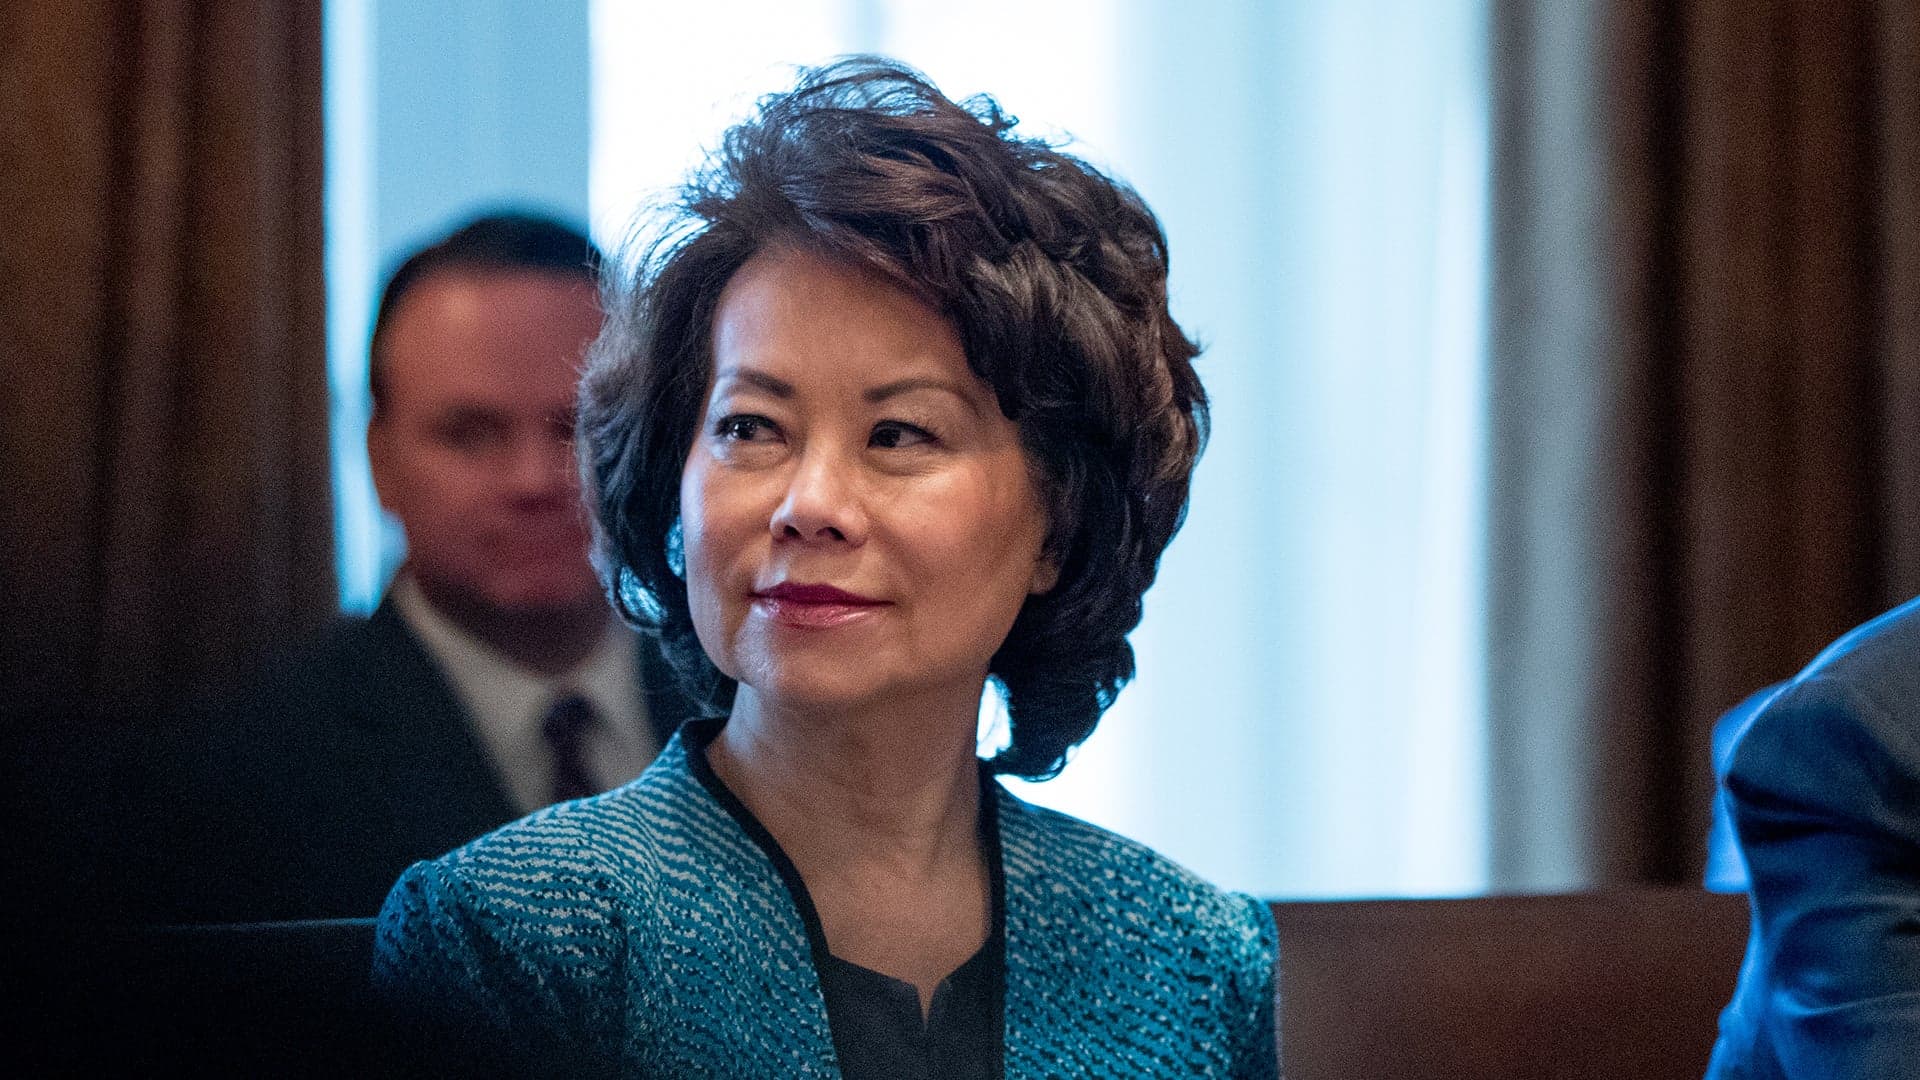 Trump Transportation Secretary Elaine Chao Seems Confused About Self-Driving Cars